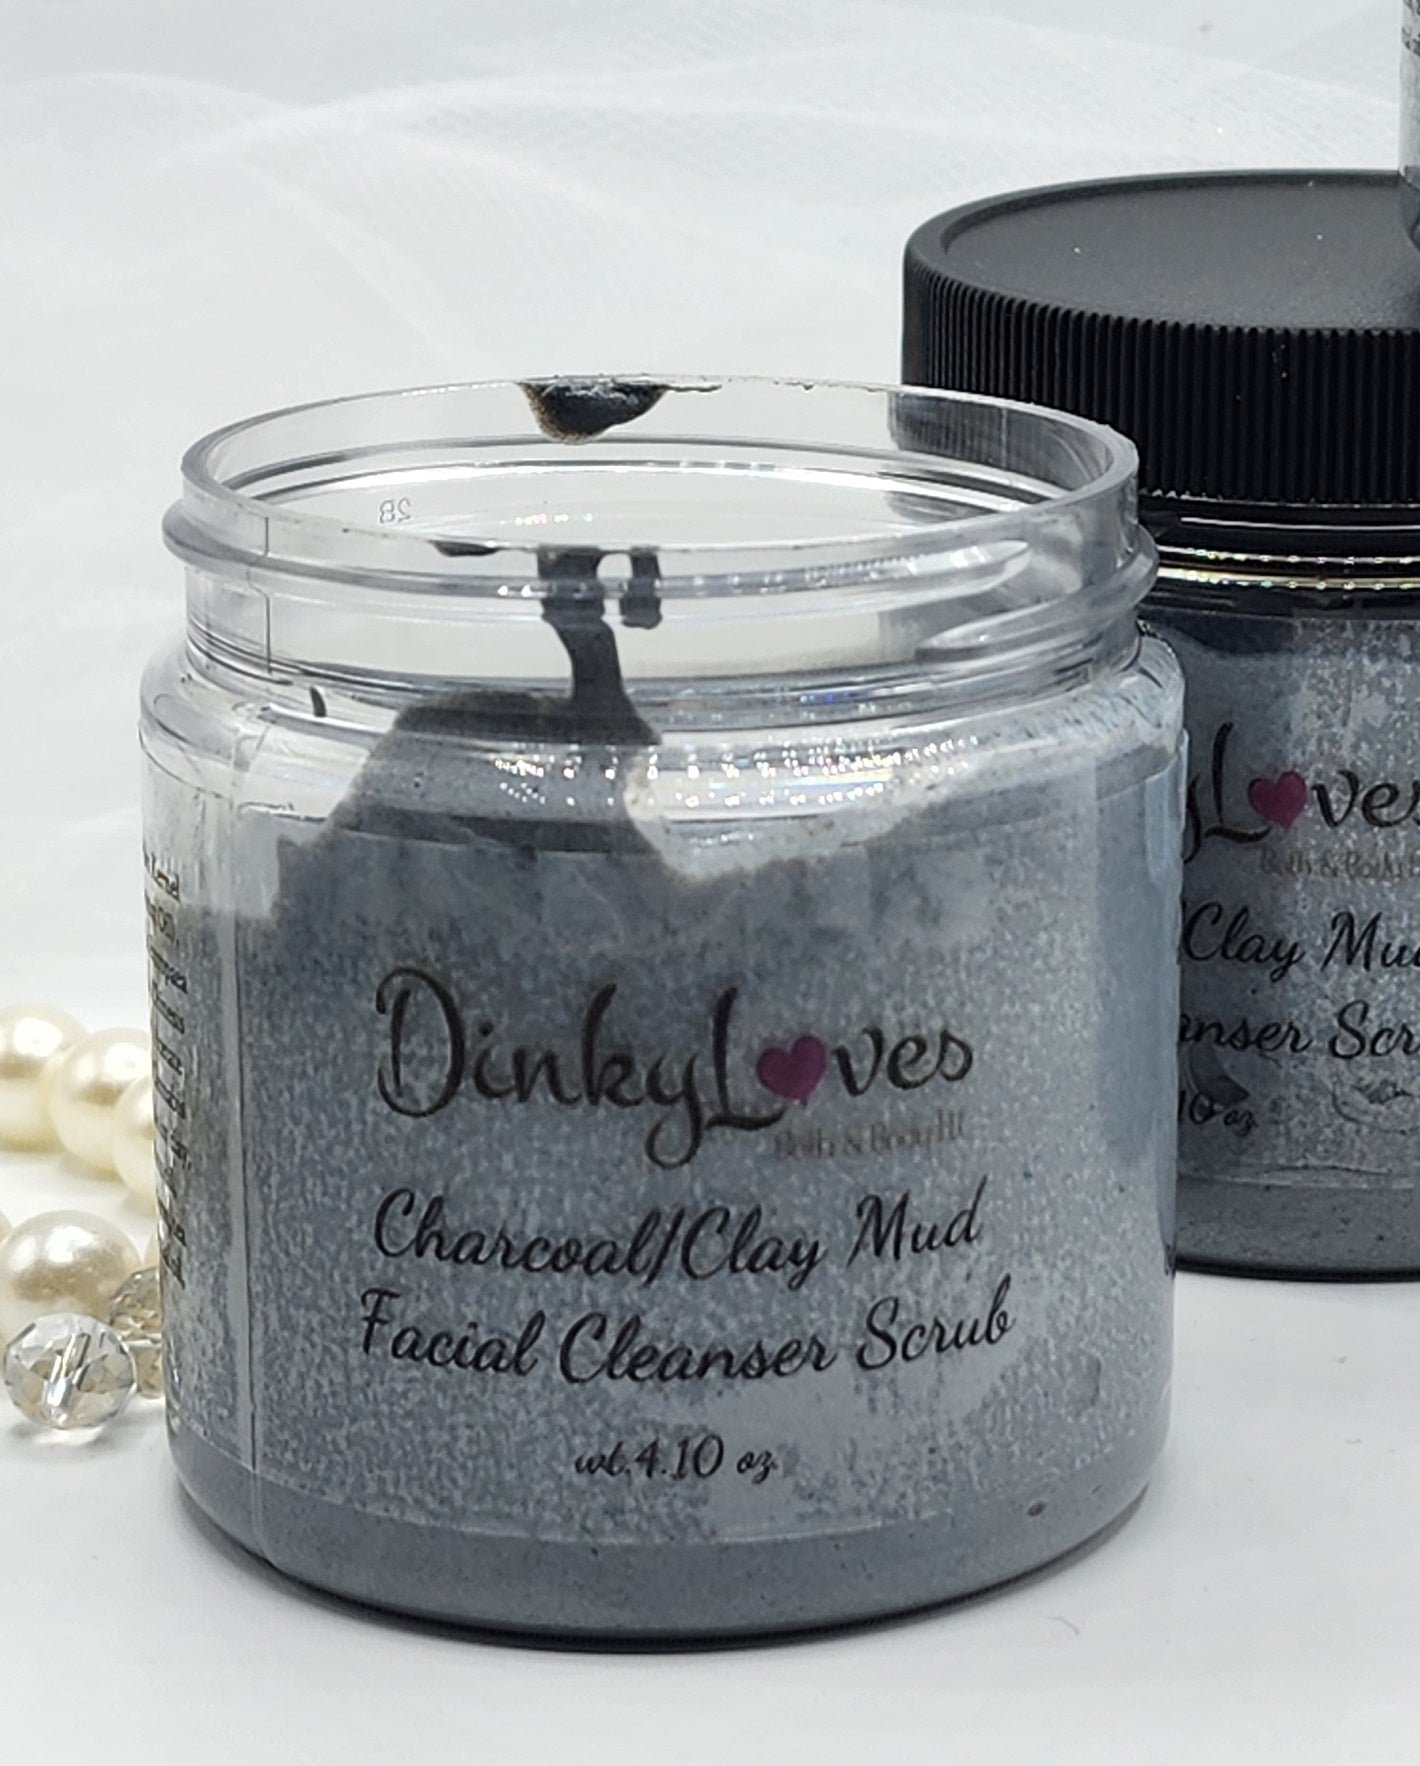 CHARCOAL / CLAY MUD FACIAL Cleanser Scrub / Activated Charcoal / Gift Idea / Essential Oil / Vegan Friendly